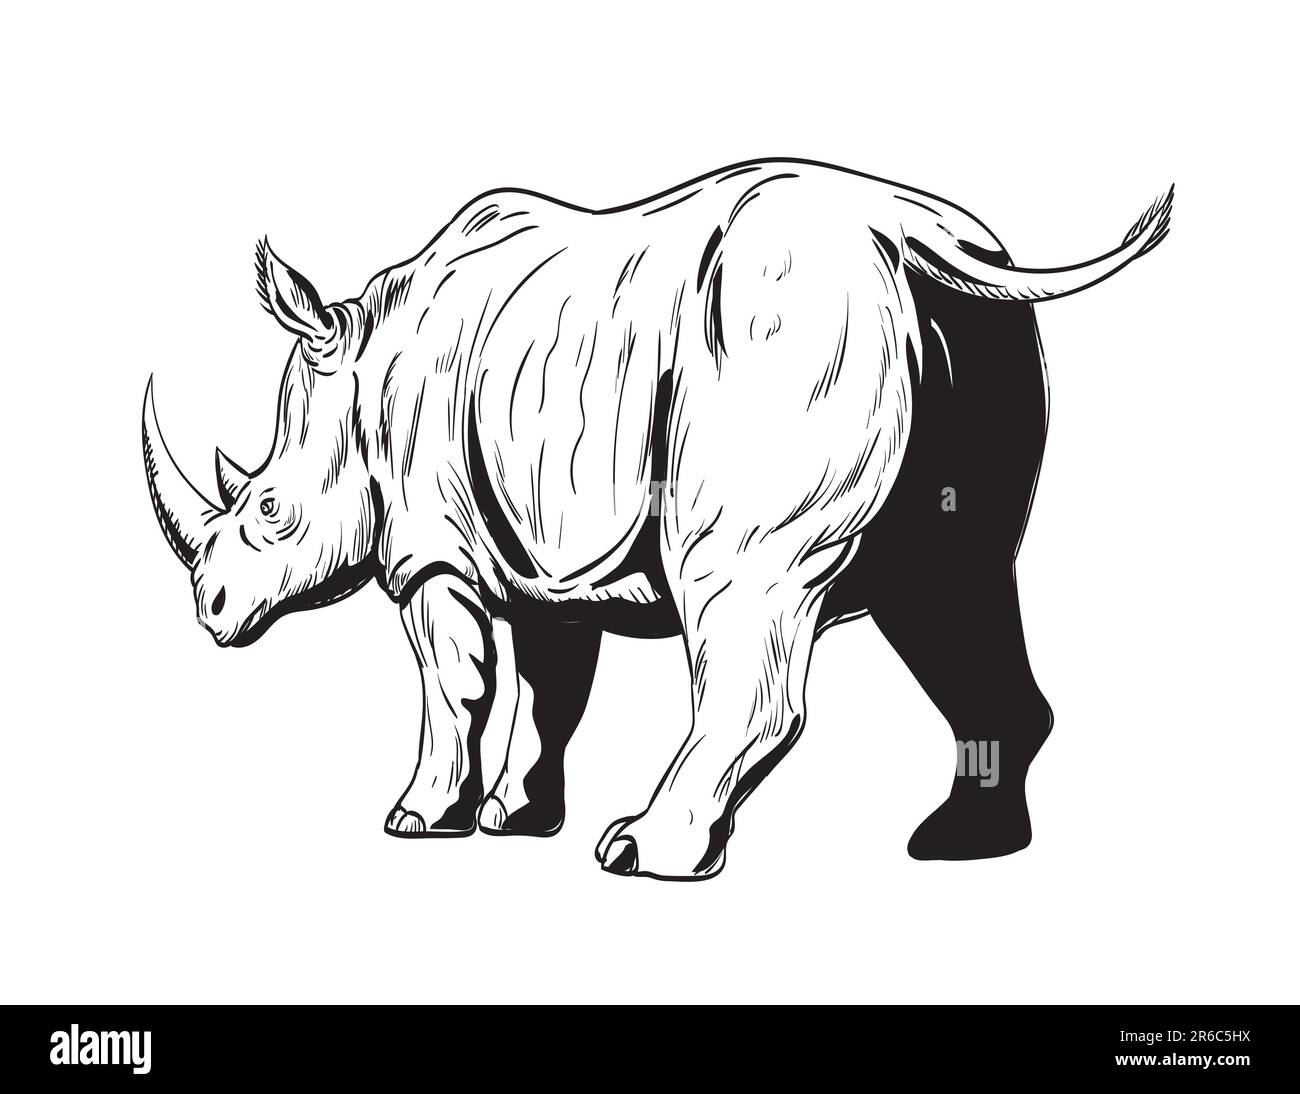 Comics style drawing or illustration of a rhinoceros or rhino, an odd-toed ungulates in the family Rhinocerotidae, charging viewed from low angle isol Stock Photo